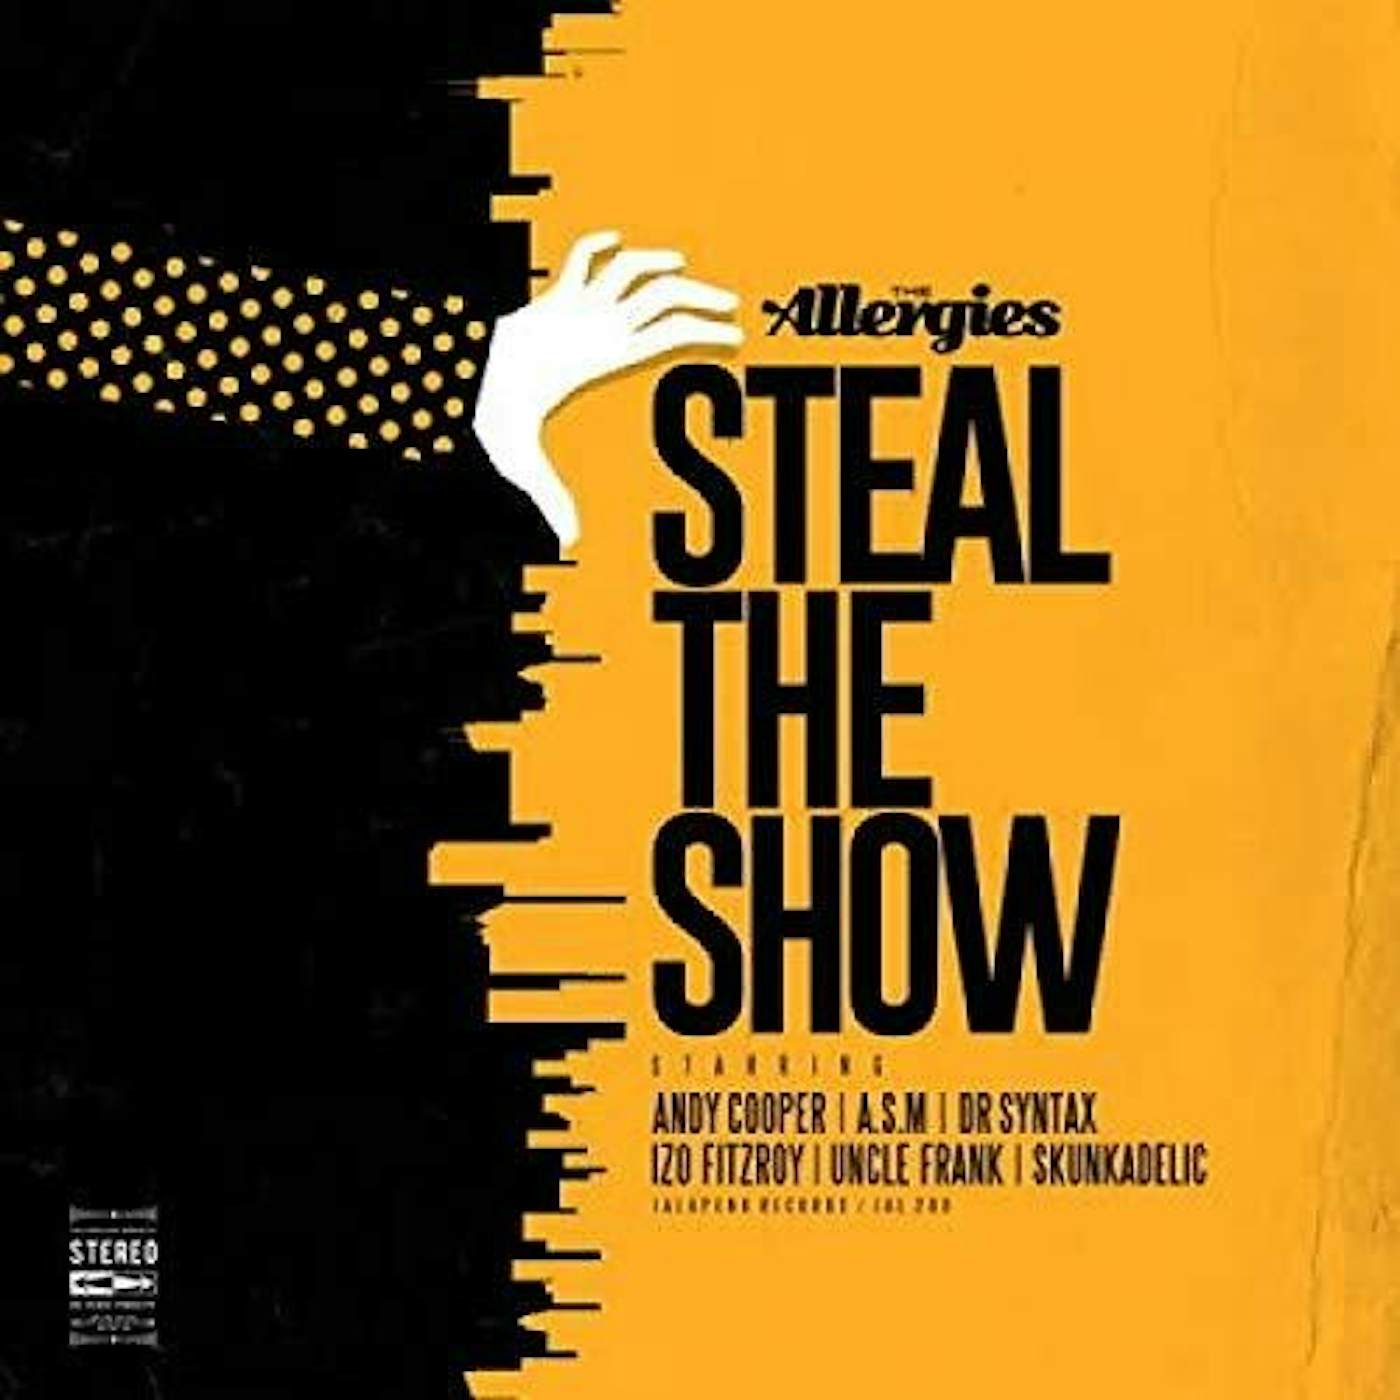 The Allergies Steal the Show Vinyl Record